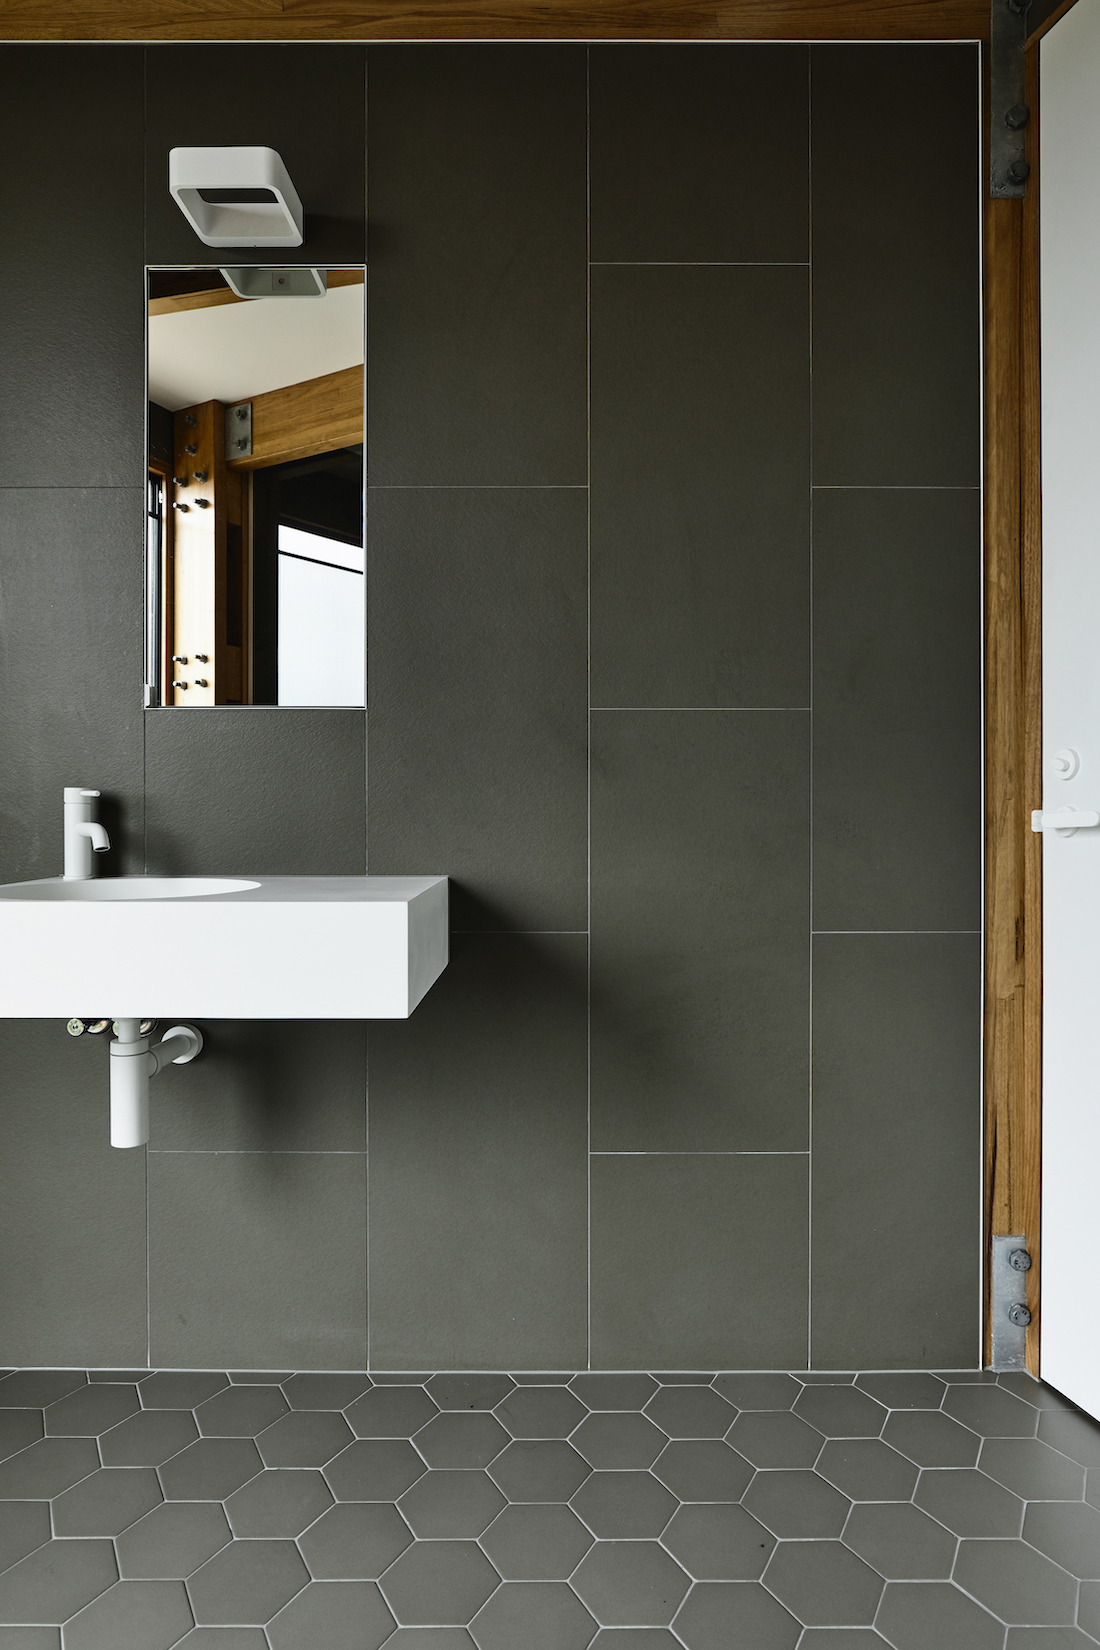 Grey wall tiles with white tap and vanity in bathroom